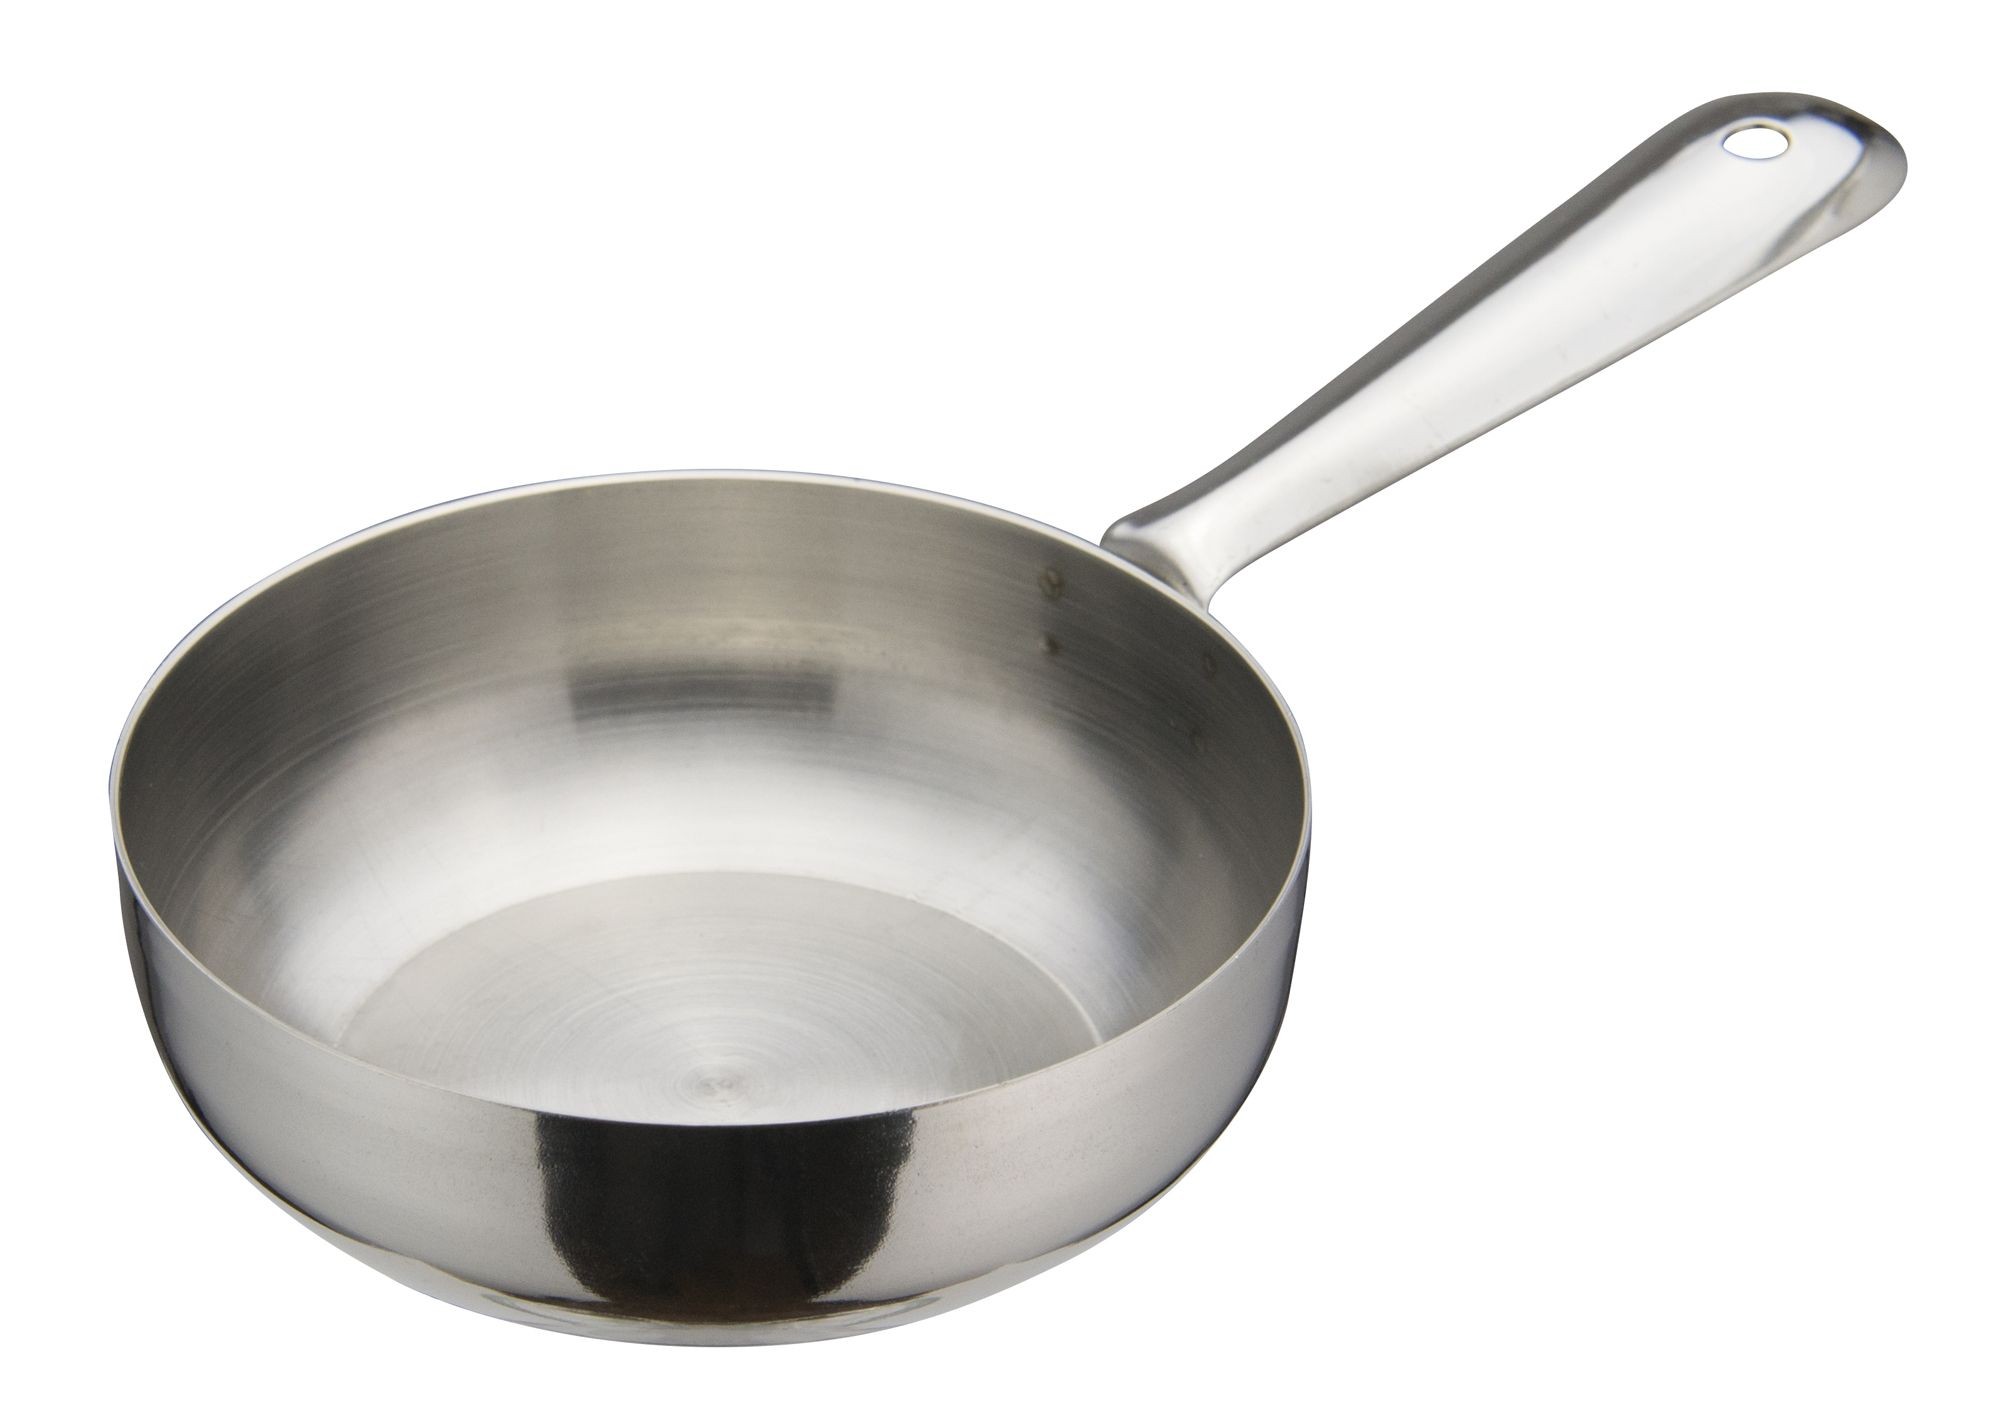 Winco DCWC-101S Stainless Steel 4" Dia x 1-1/8" H Mini Fry Pan